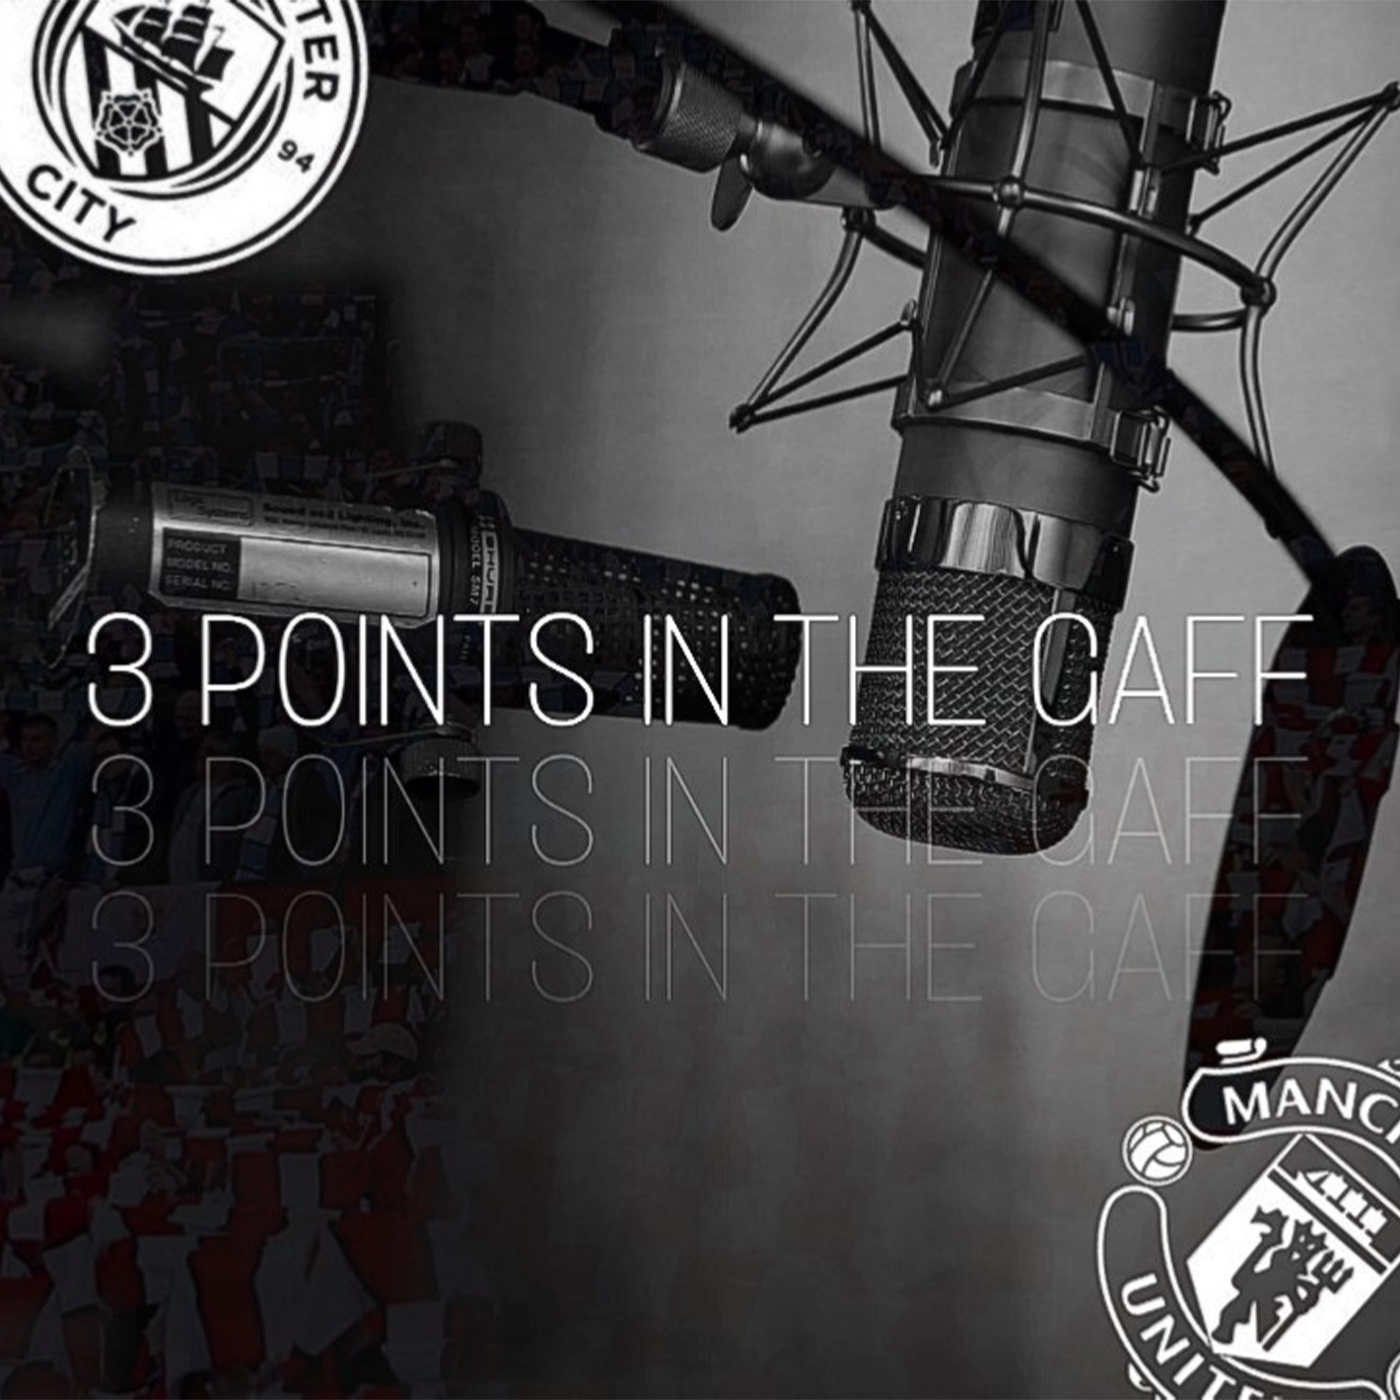 10 Questions With: Three Points In The Gaff